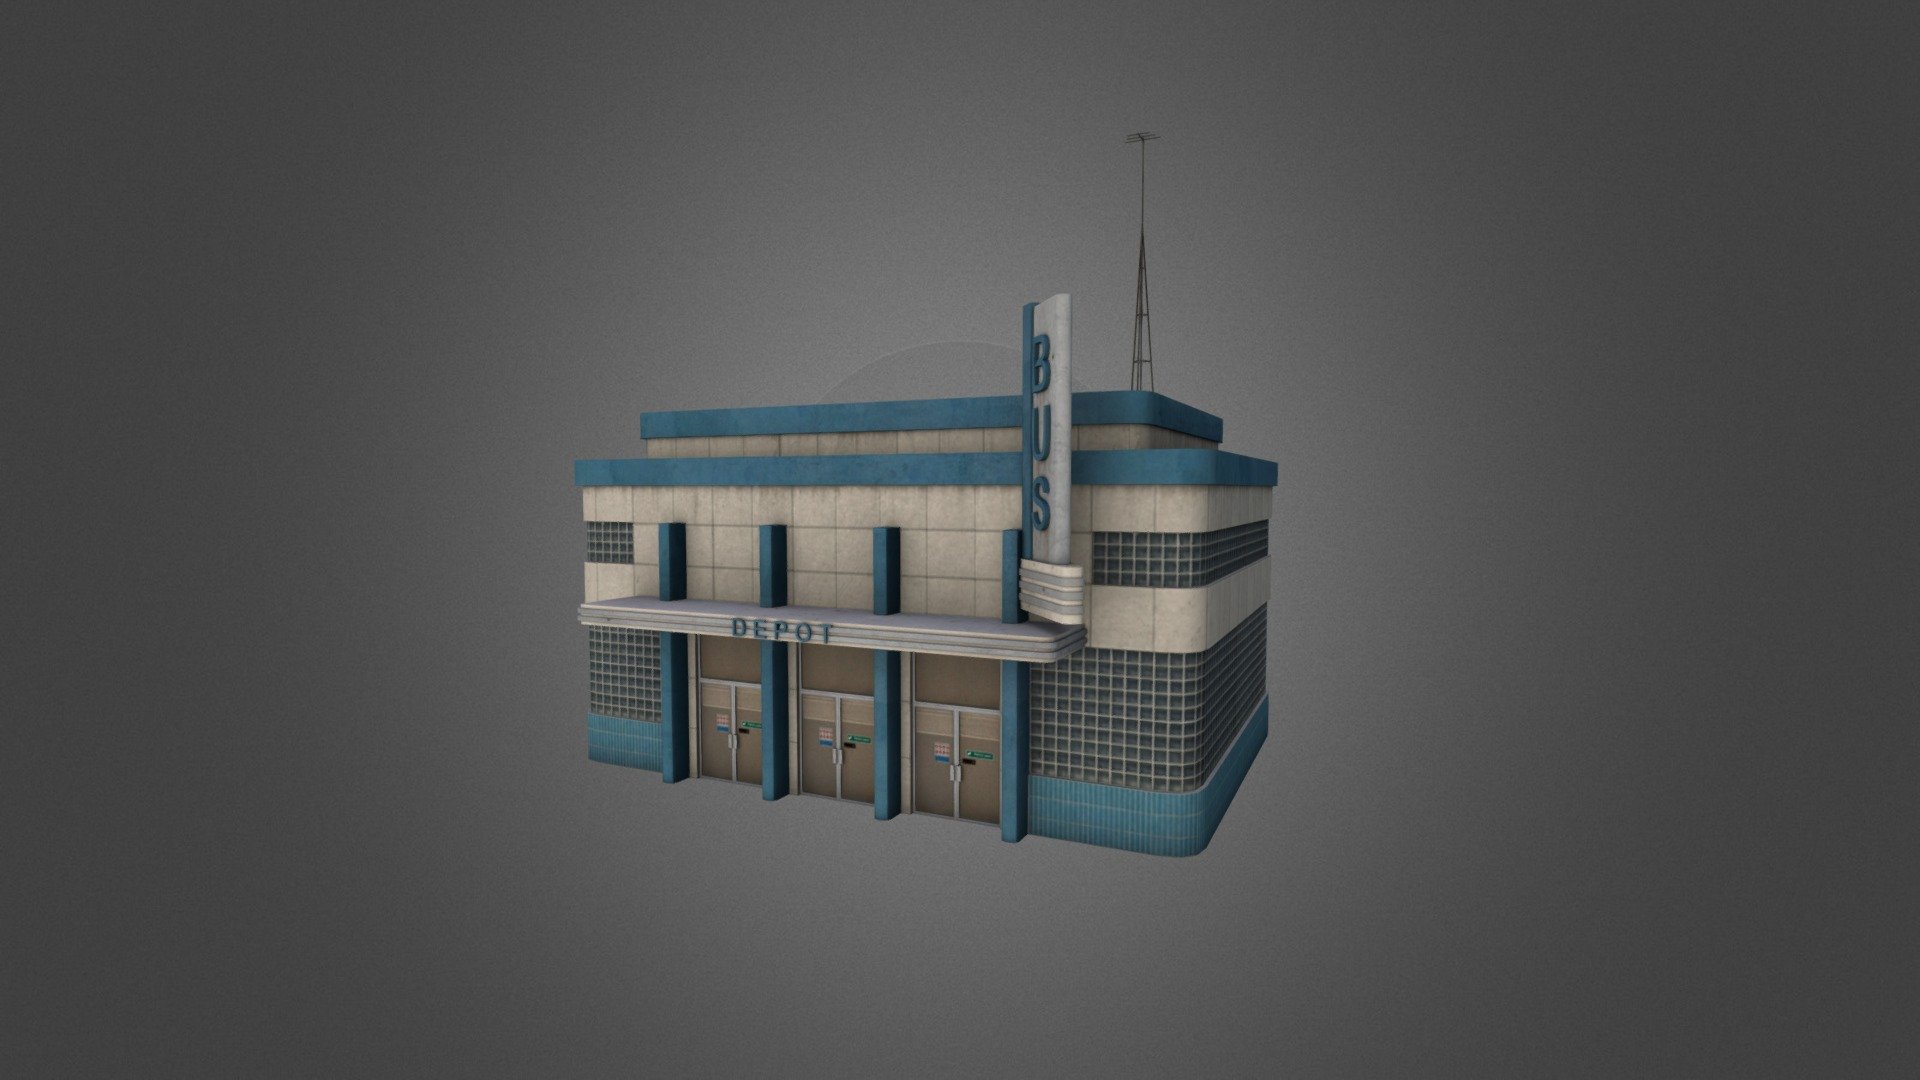 Made for Unity3d Asset Store as part of the Retro City Pack II - Retro City Pack II Building 06 - 3D model by noirfx 3d model